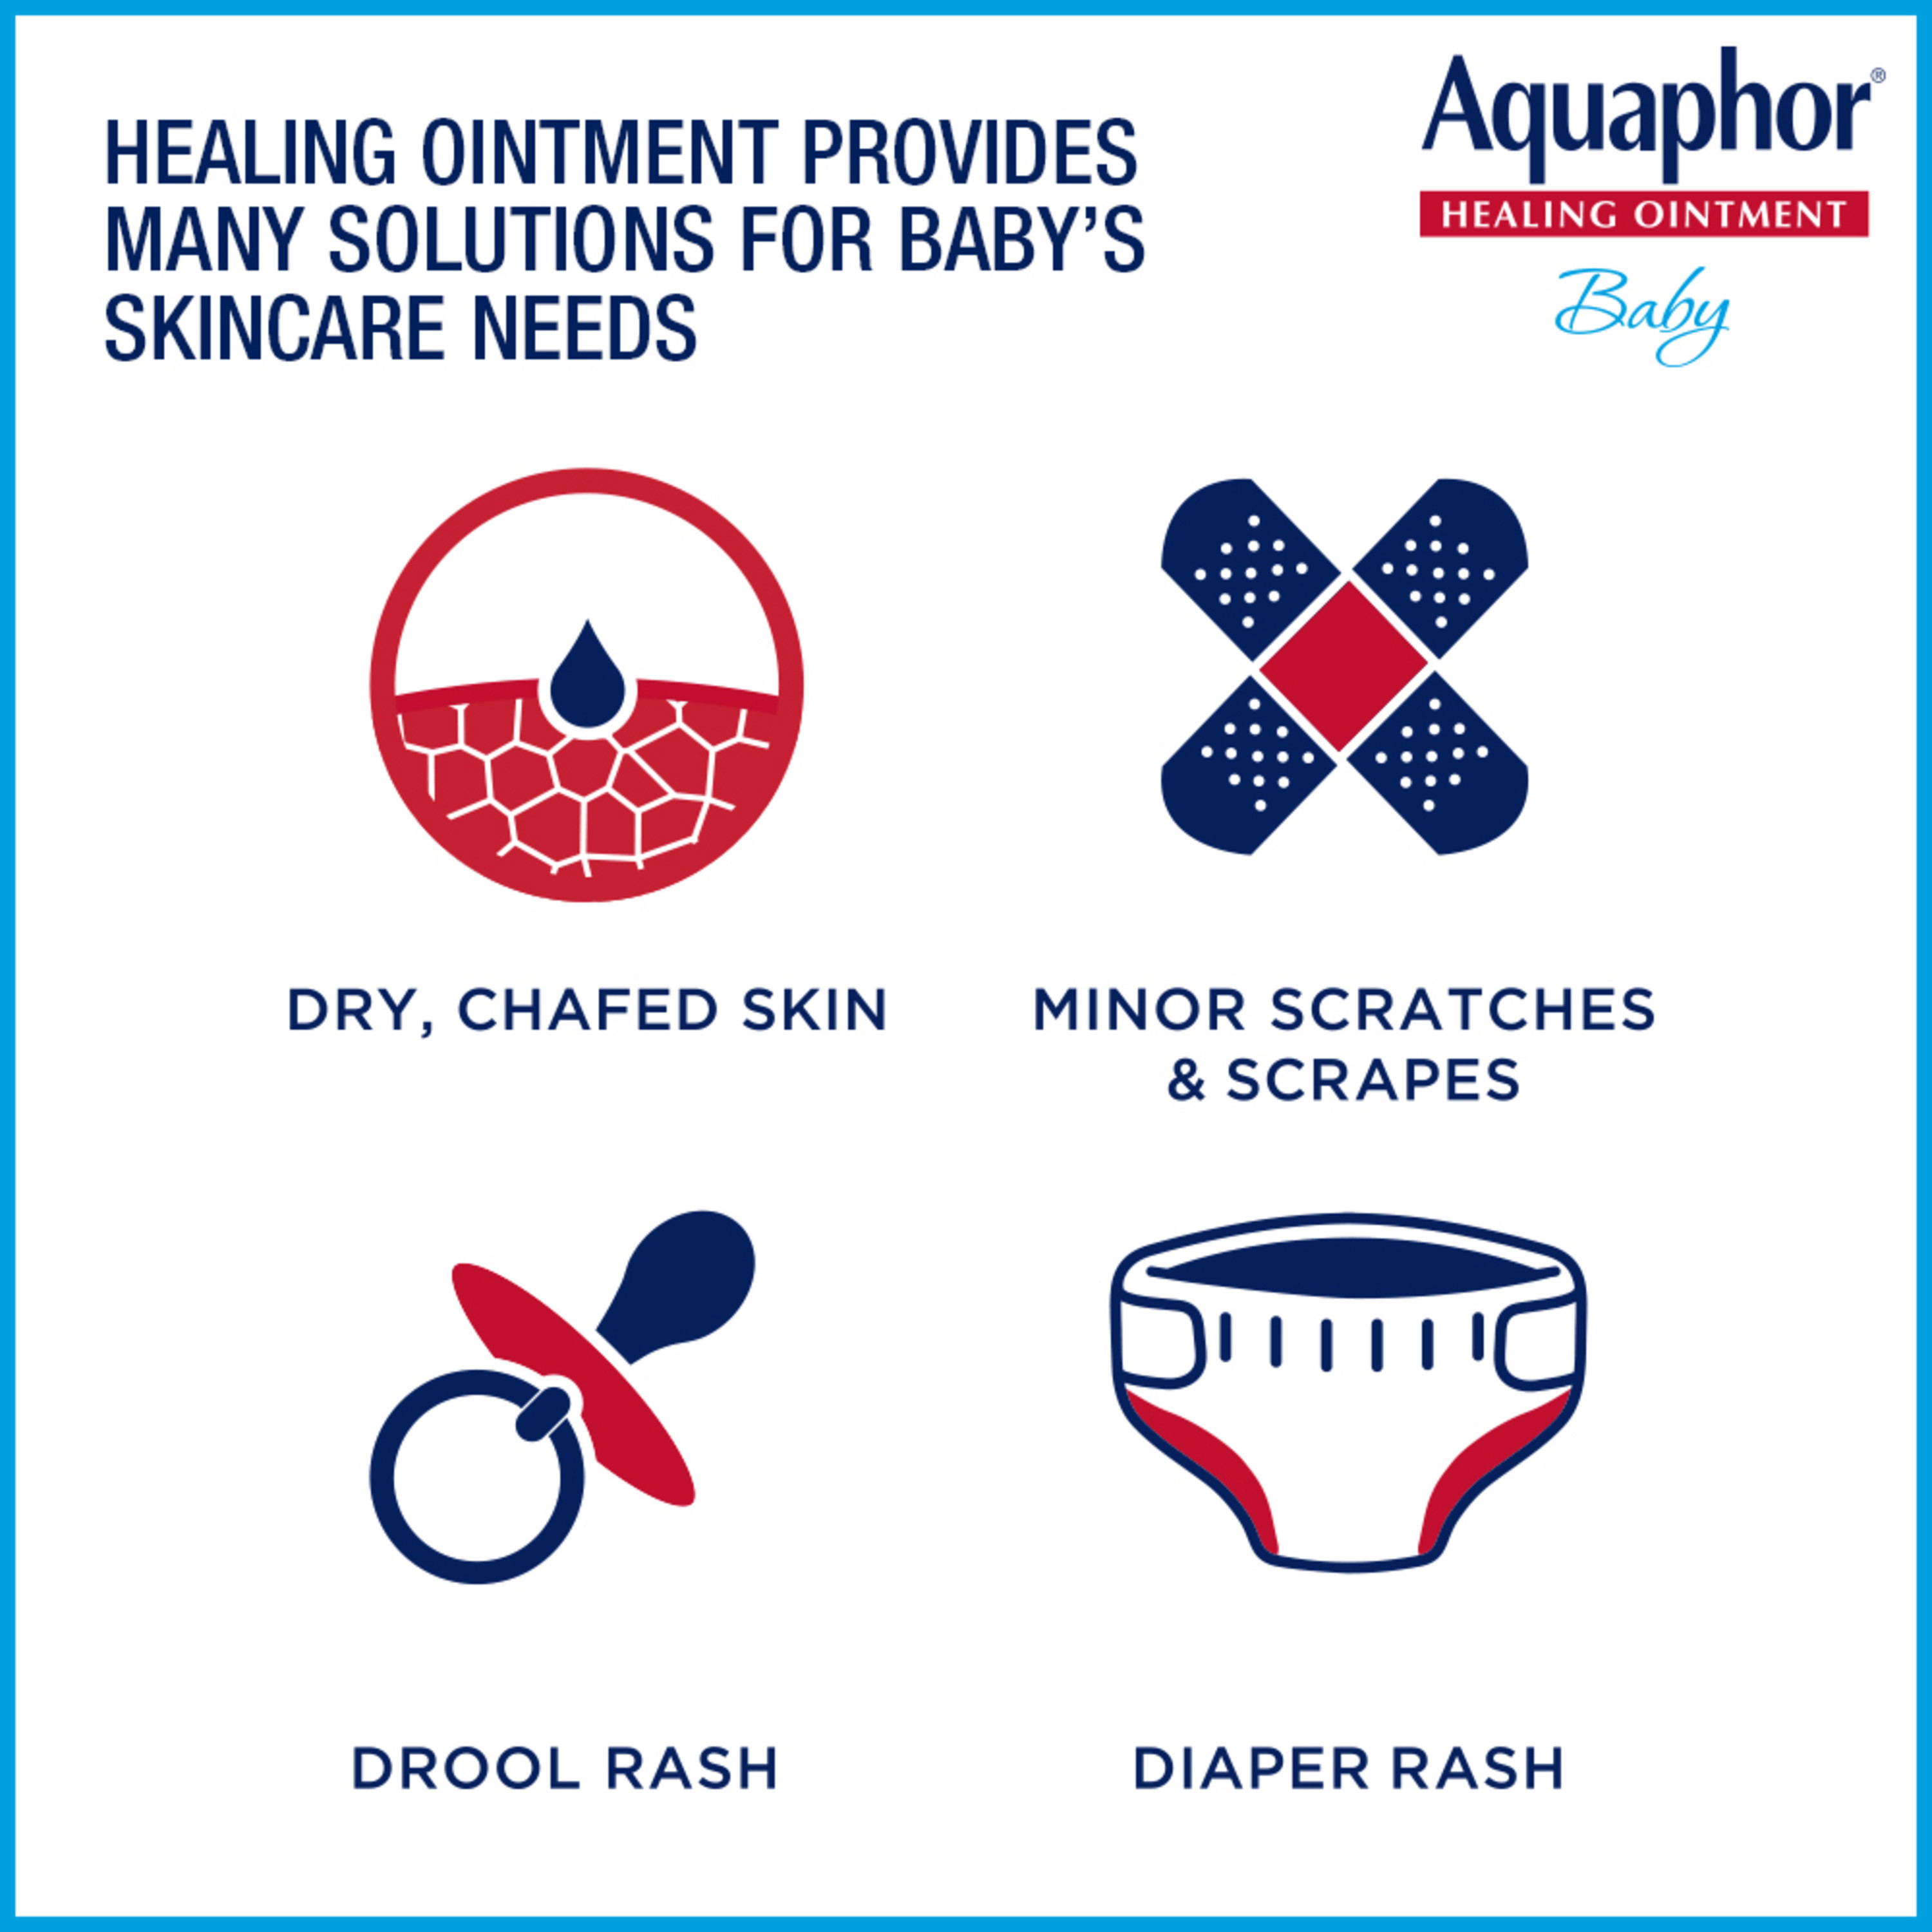 Aquaphor Baby Healing Ointment Advanced Therapy Skin Protectant, Dry Skin and Diaper Rash Ointment, 14 Oz Jar - image 5 of 12